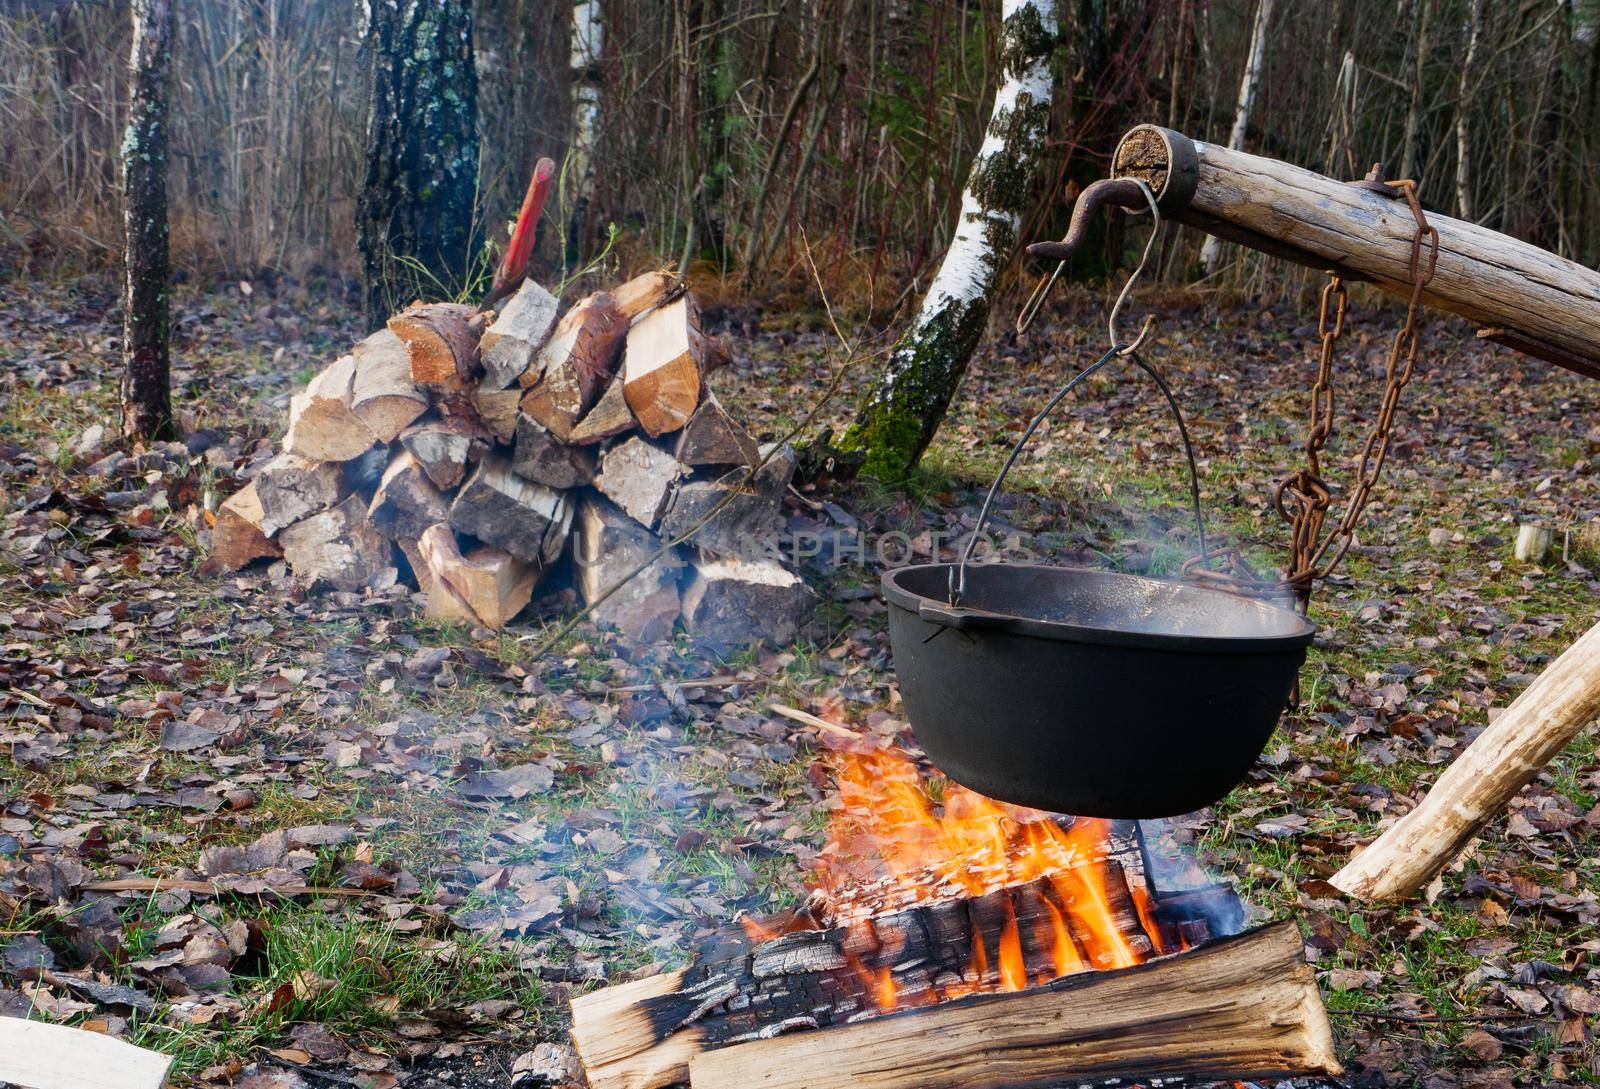 Cooking food in field conditions in a cauldron over a fire. by gelog67